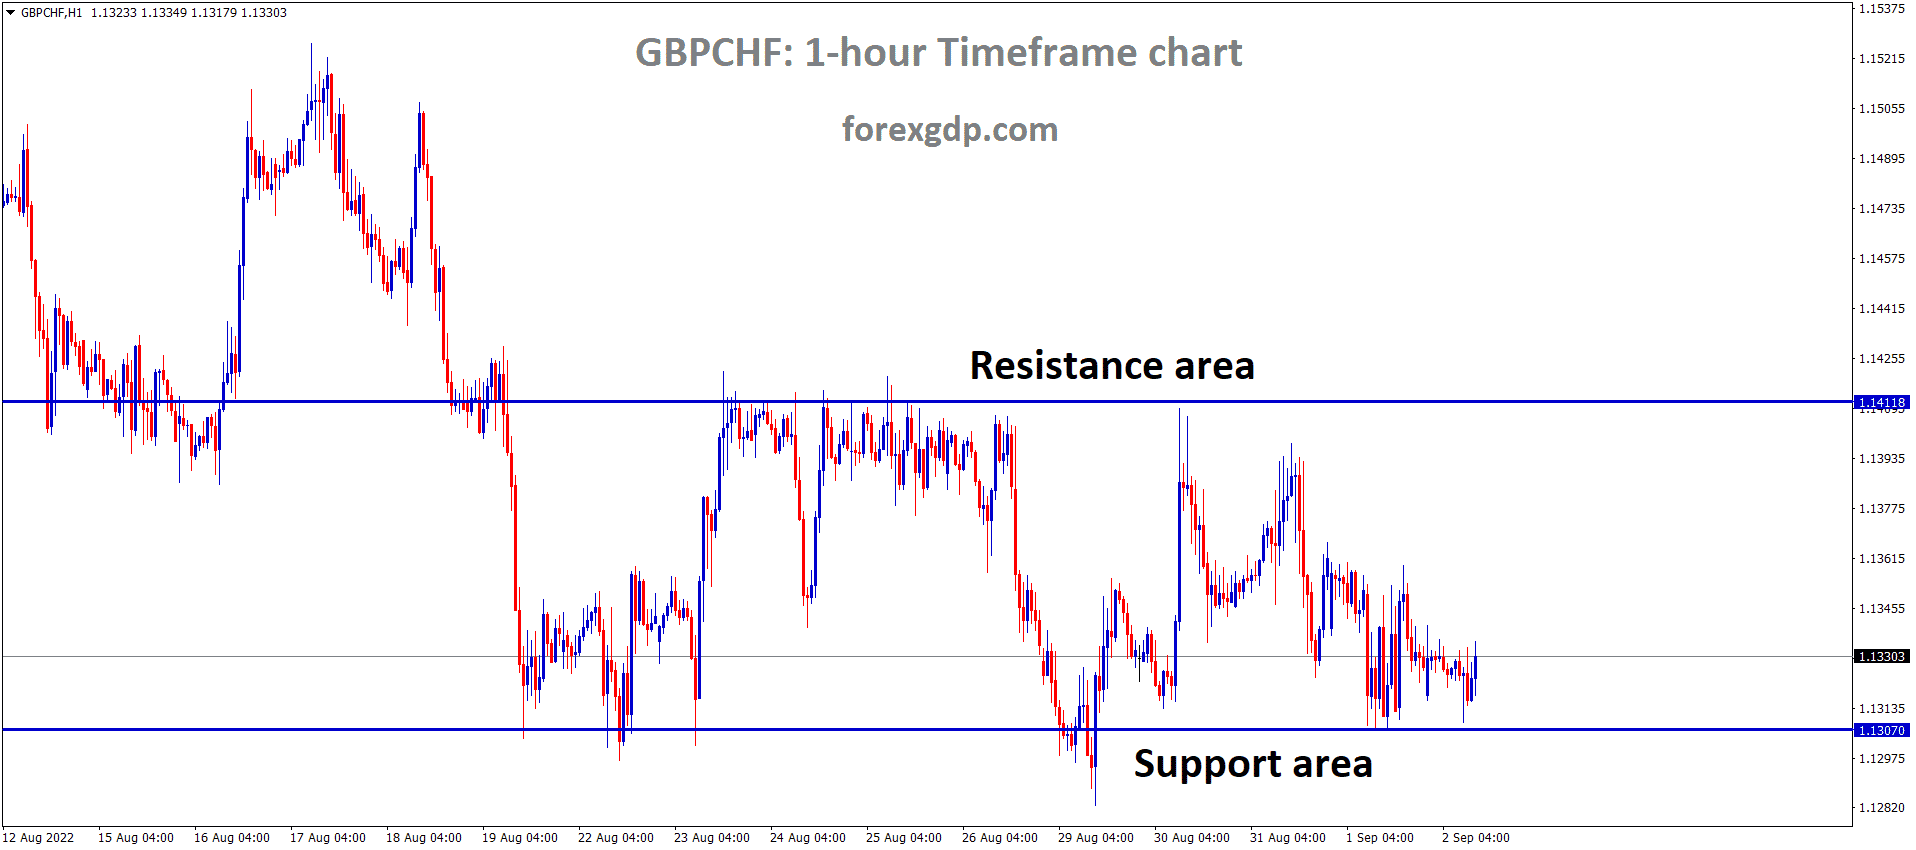 GBPCHF is moving in the Box Pattern and the market has rebounded from the Horizontal support area of the pattern